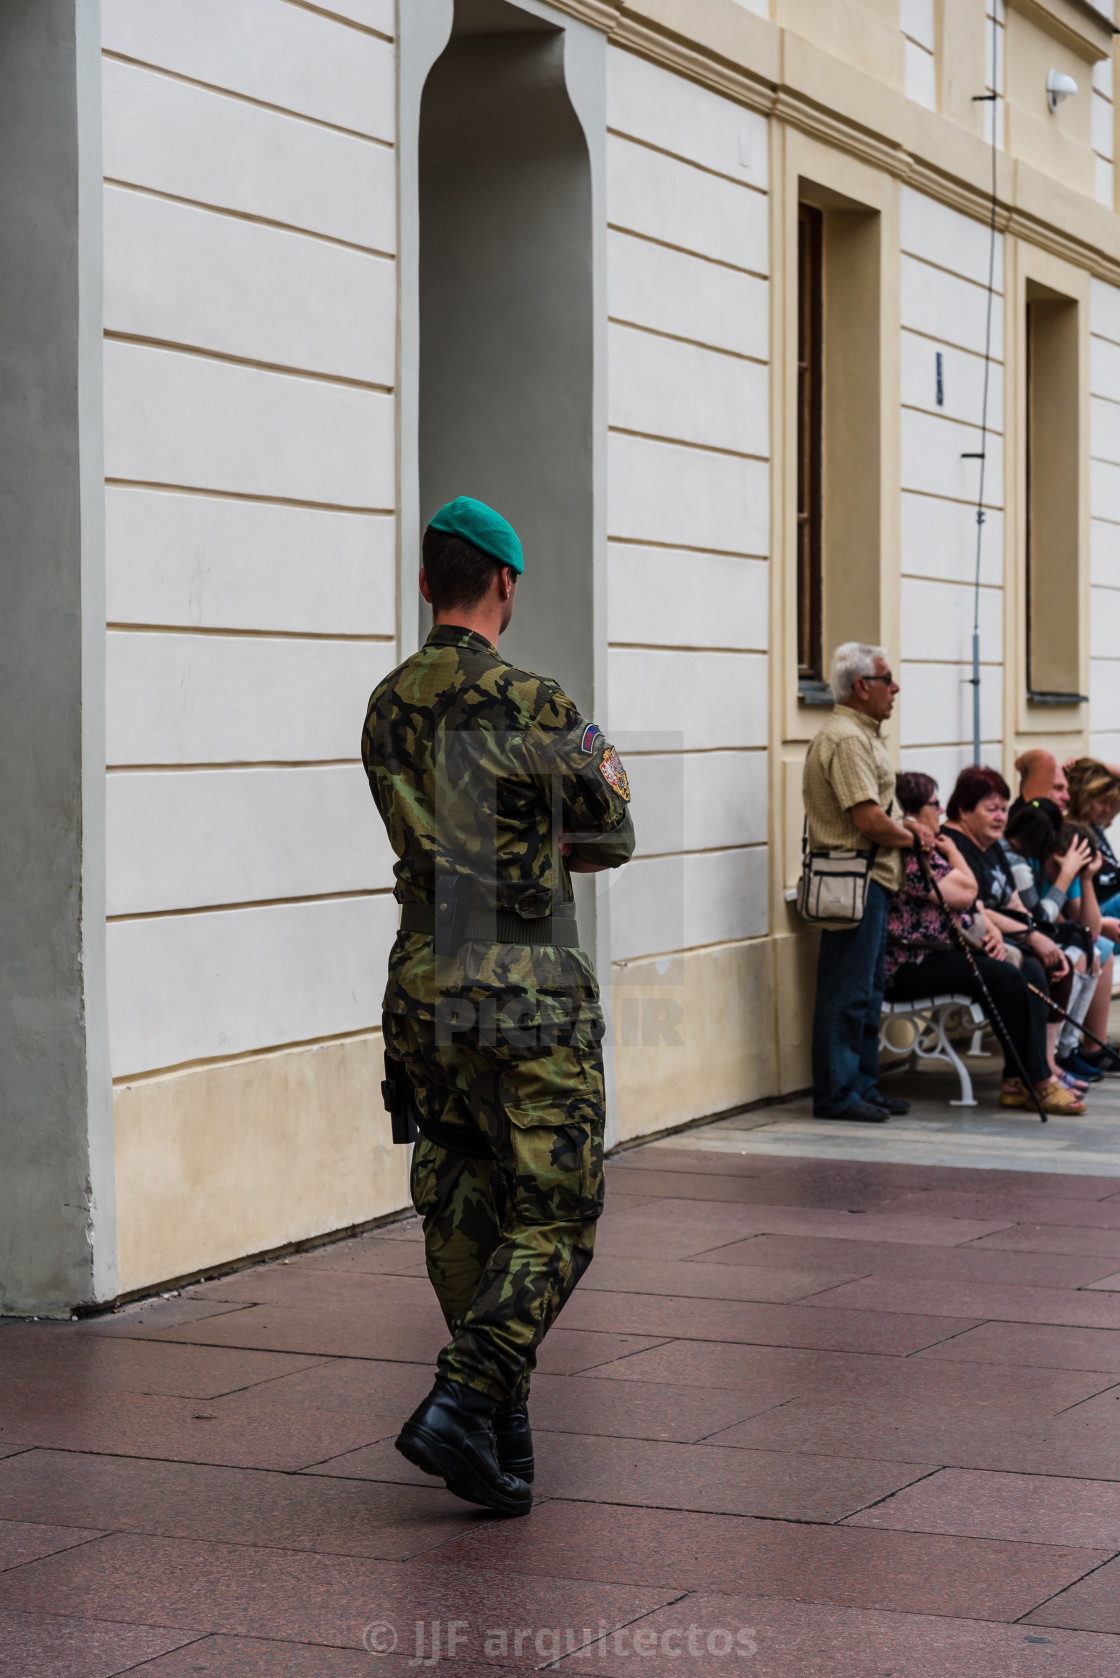 "Soldier guarding the Royal Palace of Prague" stock image